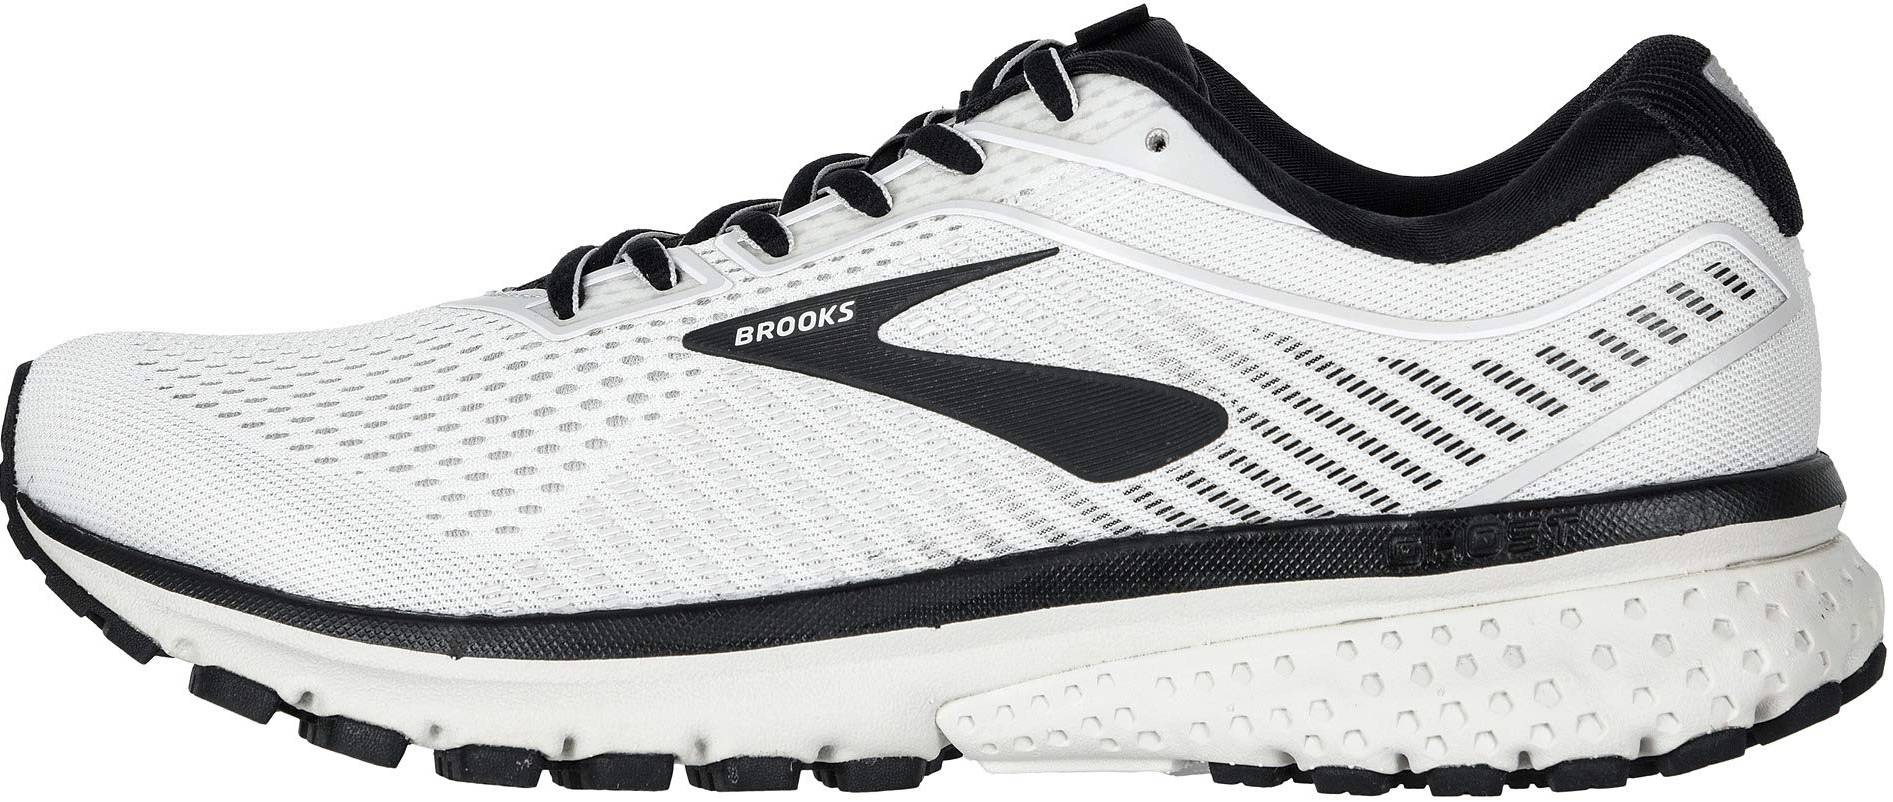 buy white sports shoes online